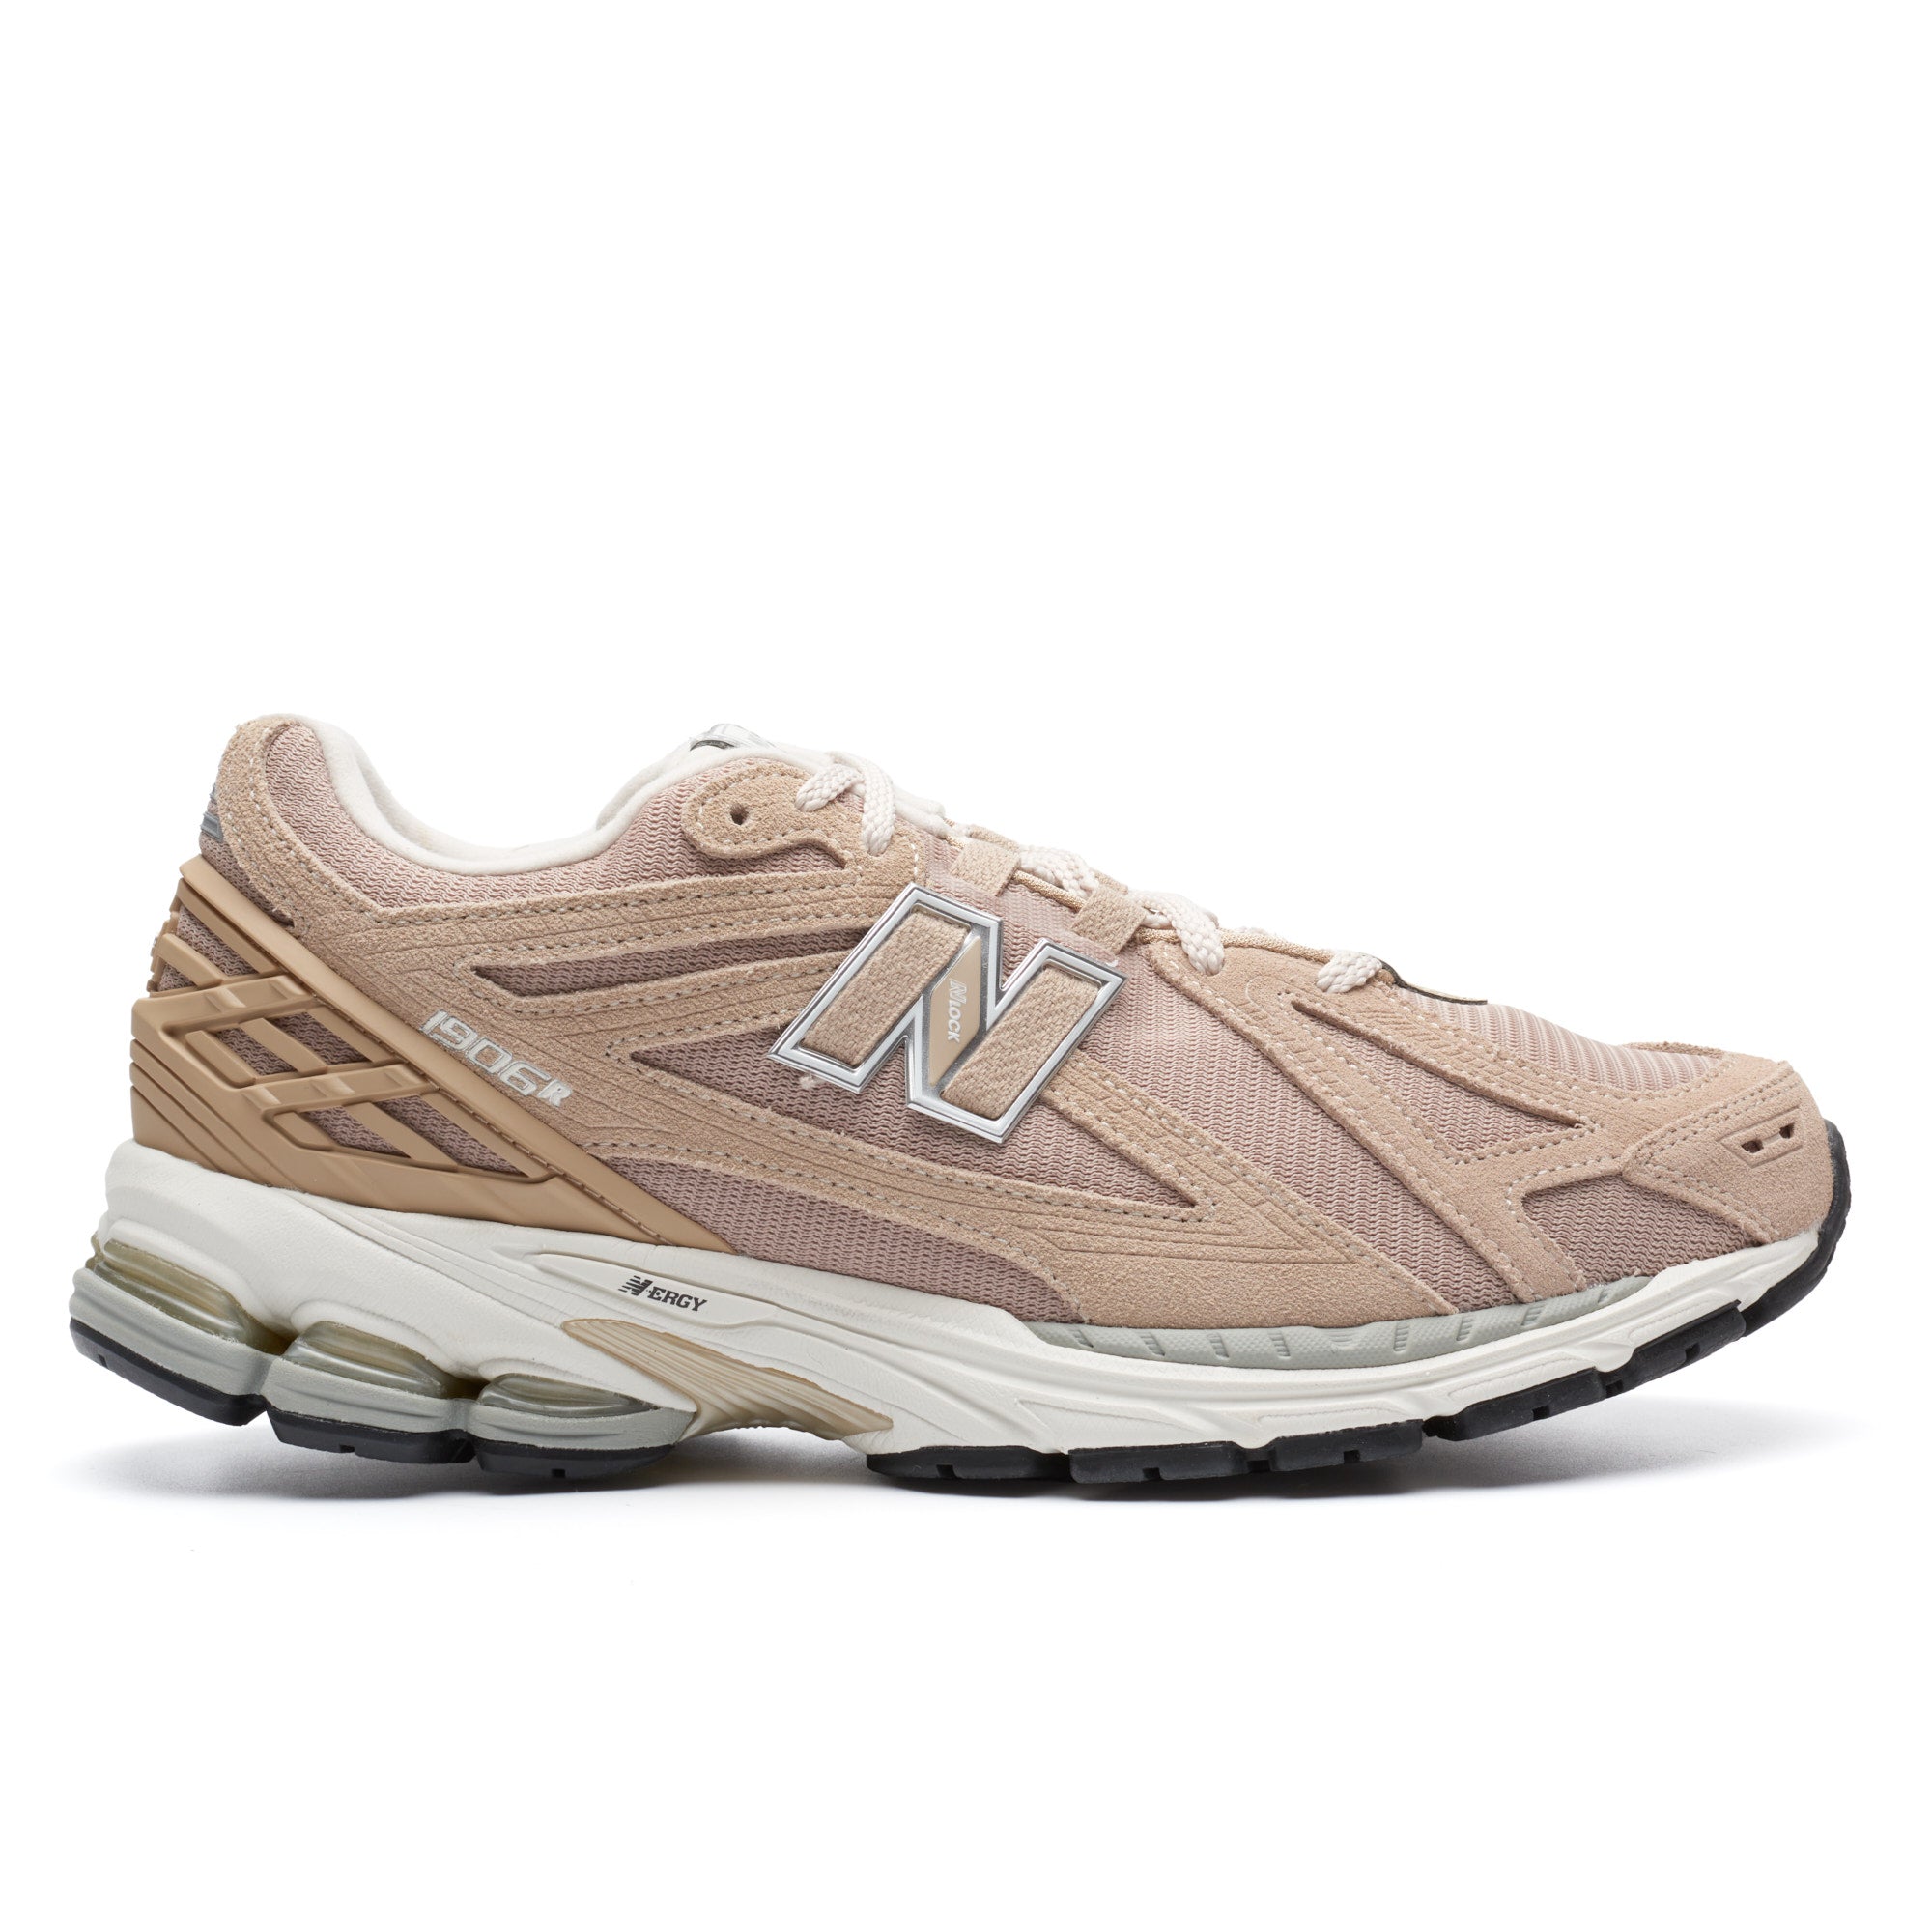 NEW BALANCE Beige Running Sneakers Shoes UK 9.5 US 10 NEW –